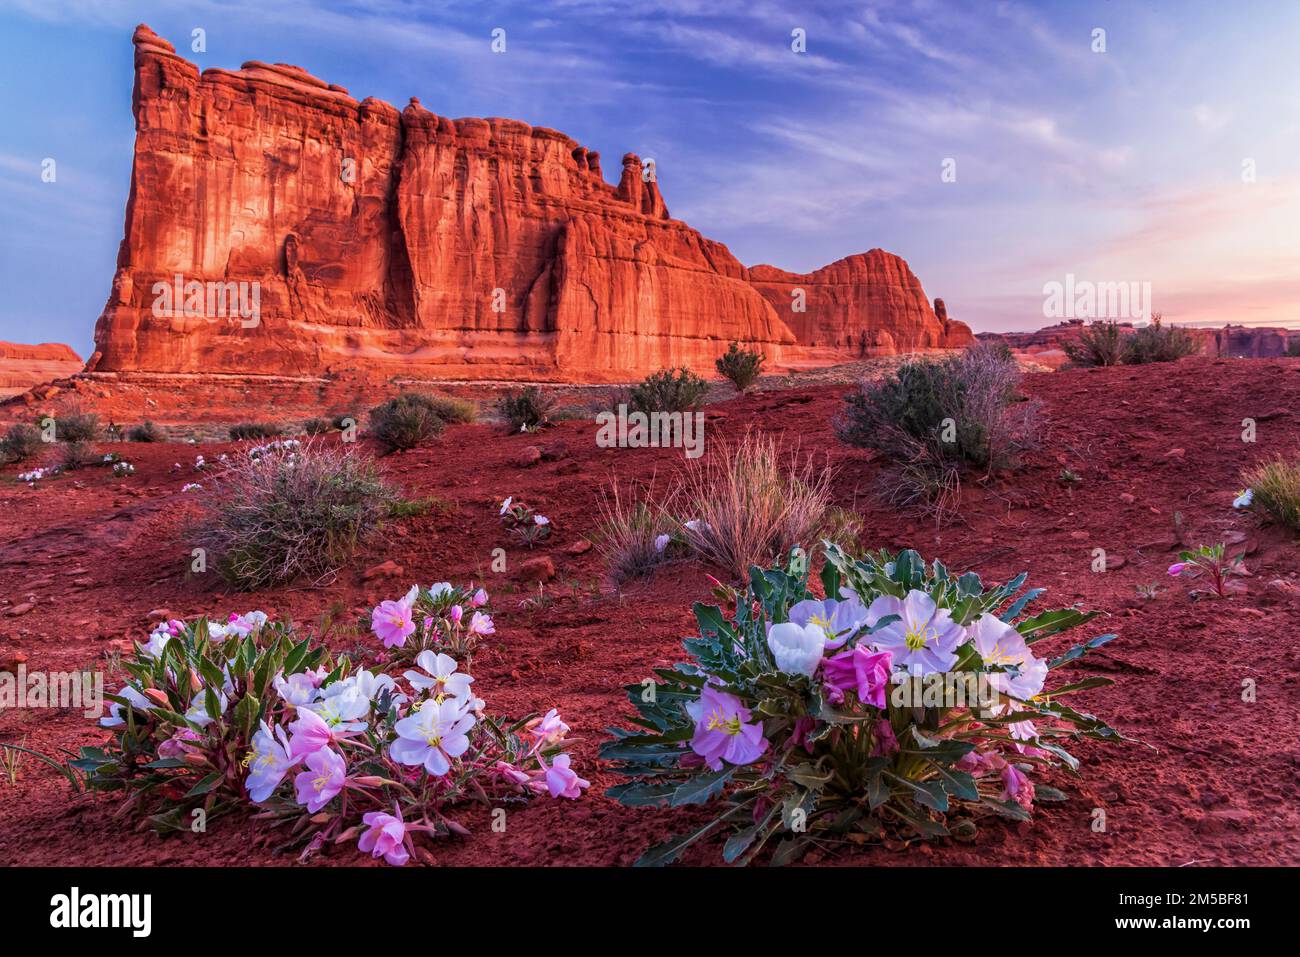 The Tower of Babel rock formation  during a Spring Primrose bloom in Arches National Park near Moab Utah. Stock Photo